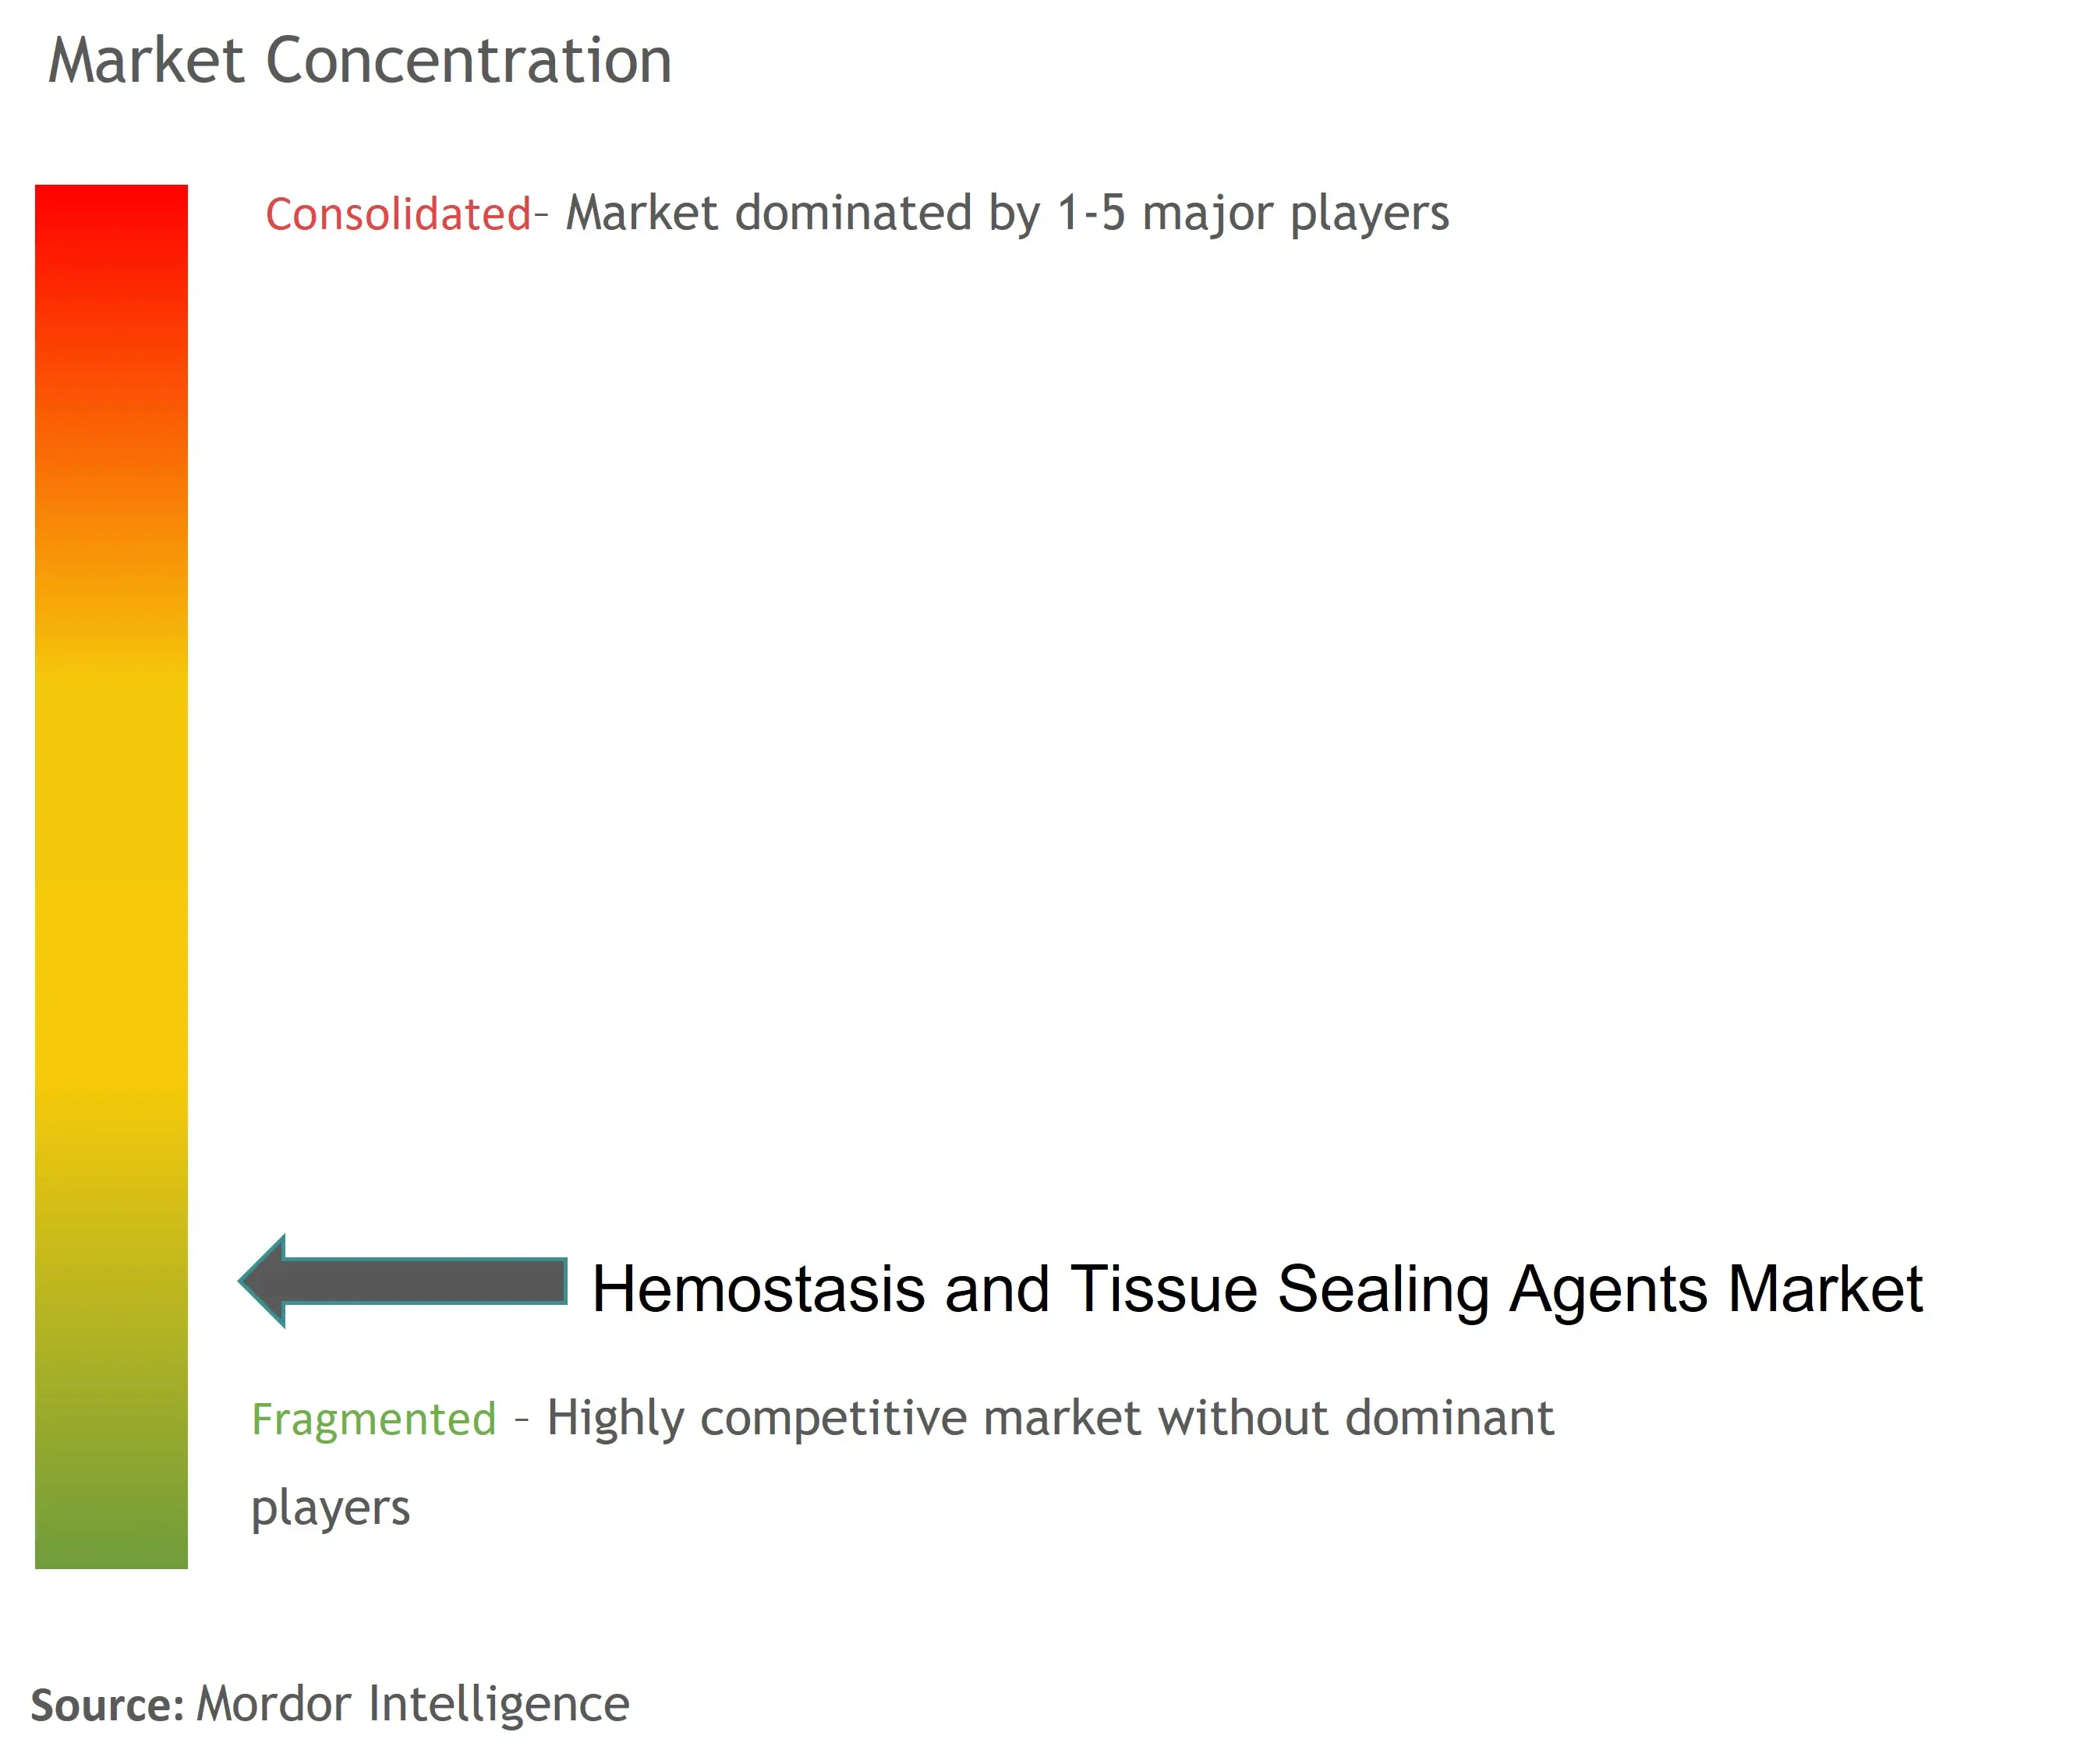 Hemostasis and Tissue Sealing Agents Market Concentration